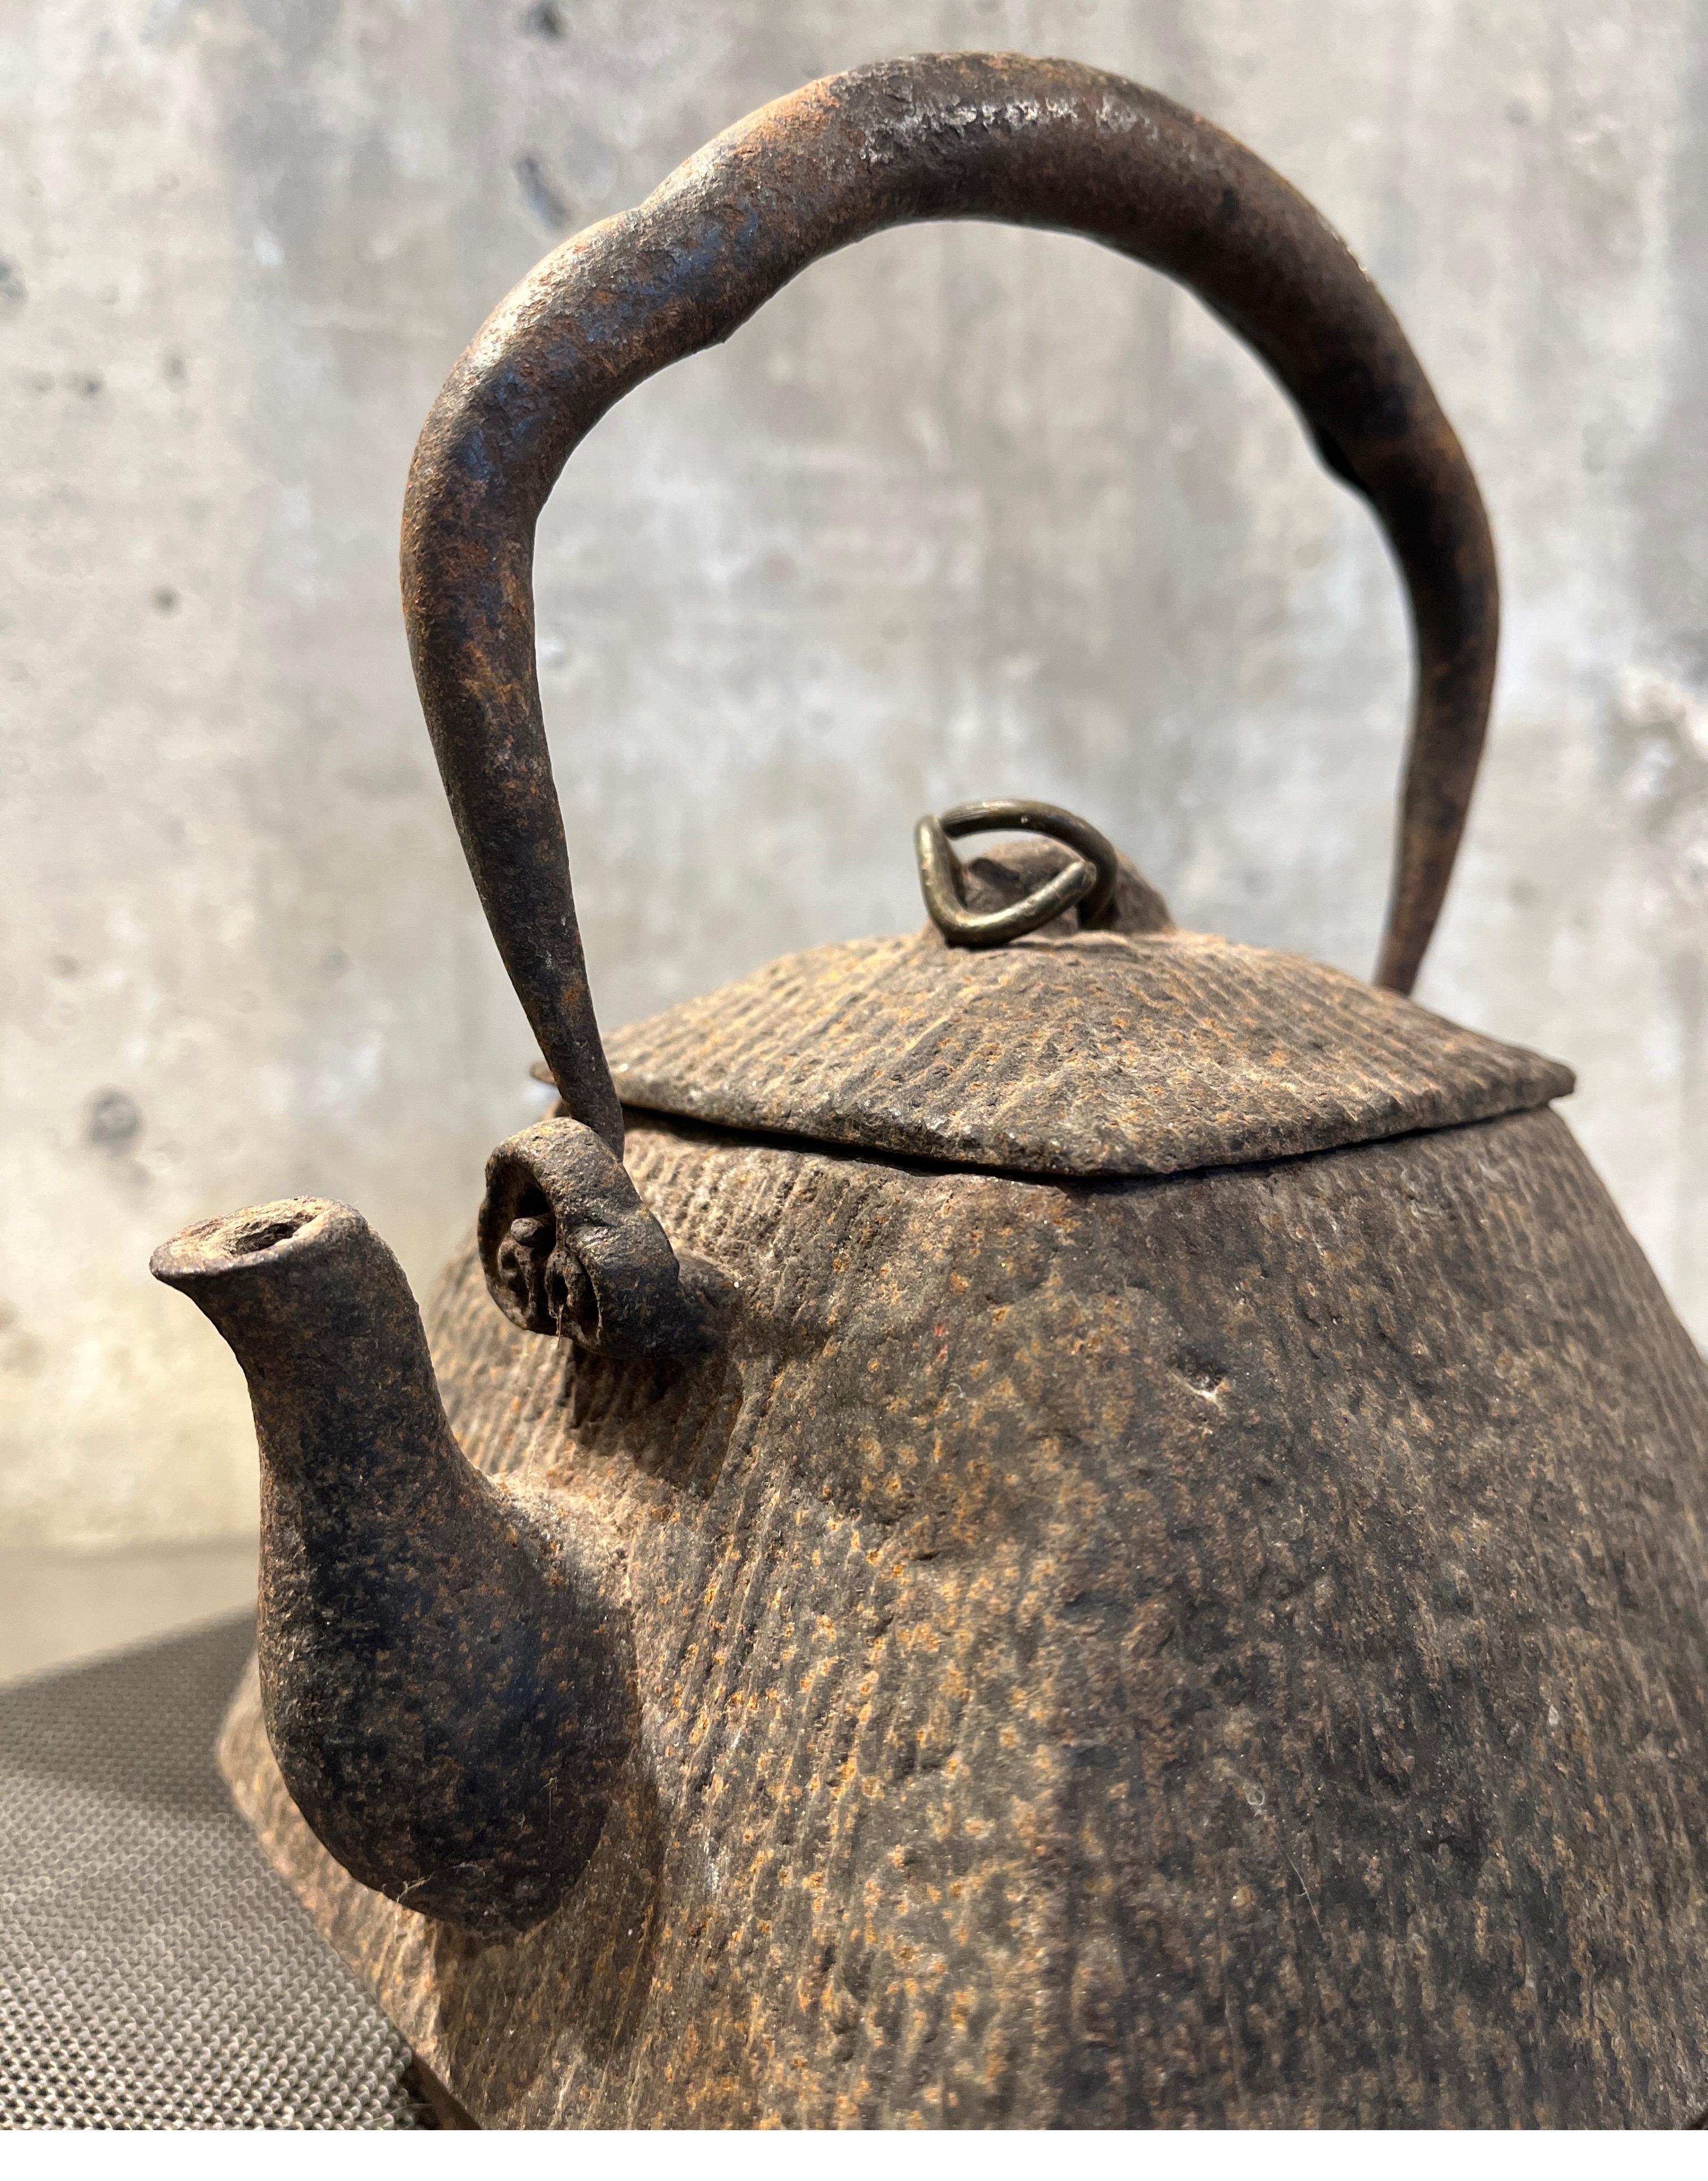 A beautifully shaped antique cast iron teapot from Japan.  This heavy  pot, with it's original,  decorative handle, exhibits an attractively rough texture and has a very strong presence.  It's shape, reminiscent of an old Japanese house or temple,